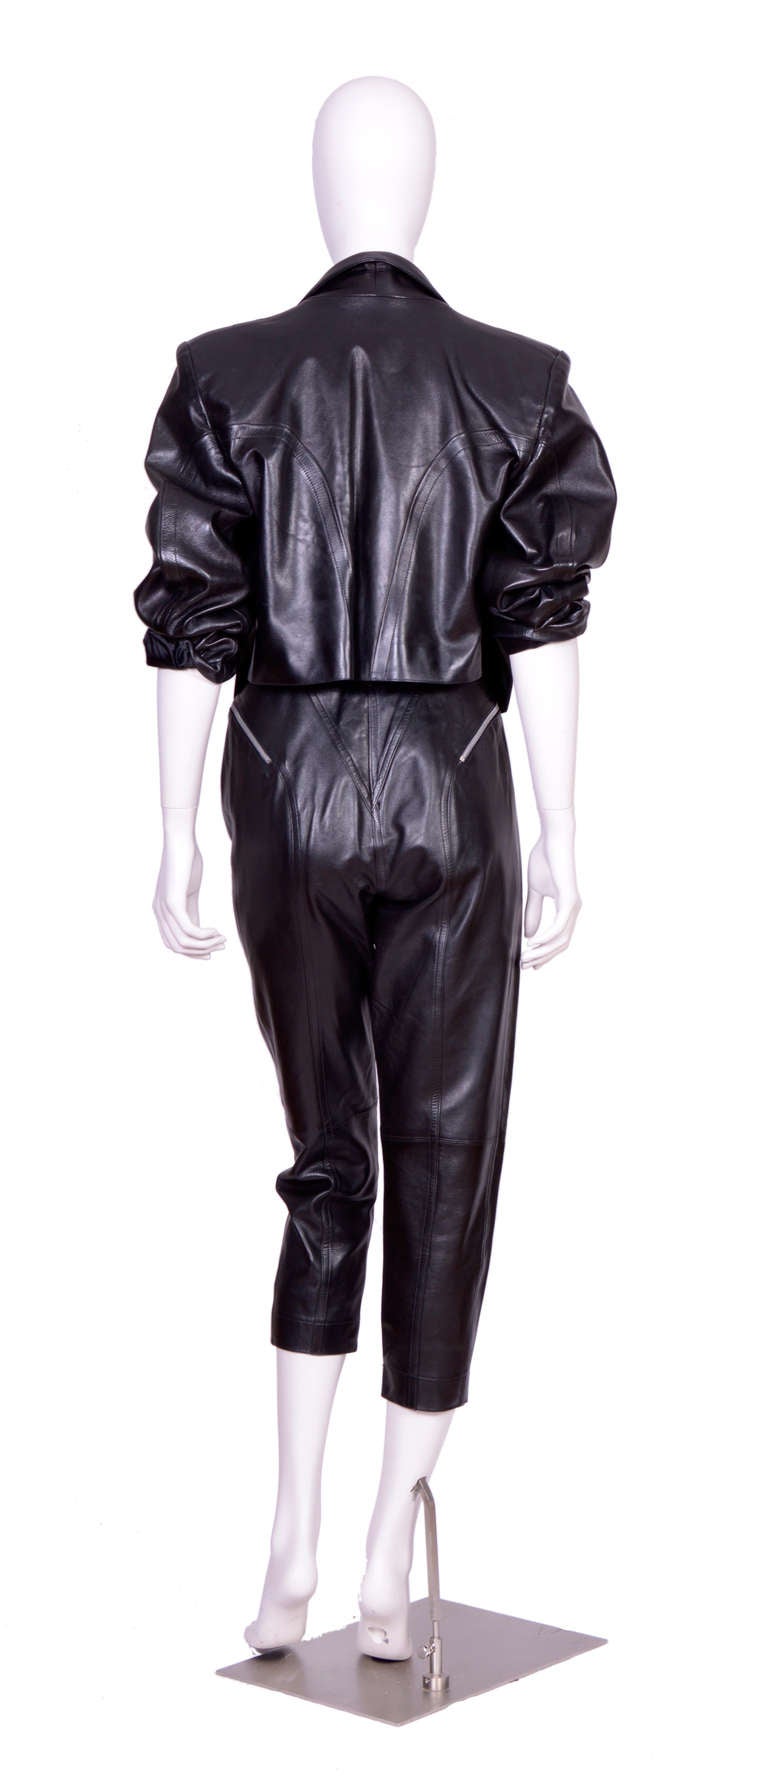 Iconic vintage 80's Alaia black leather suit. 
Jacket French size 42
Trousers French Size 40
Measurements taken flat:
Trousers: waist 13,5inch/34cm(x2) - Hip 20inch/51cm(x2) - inseam 25inch/64cm - rise 15inch/38cm
Jacket: Sh to Sh 18inch/46cm - Ua